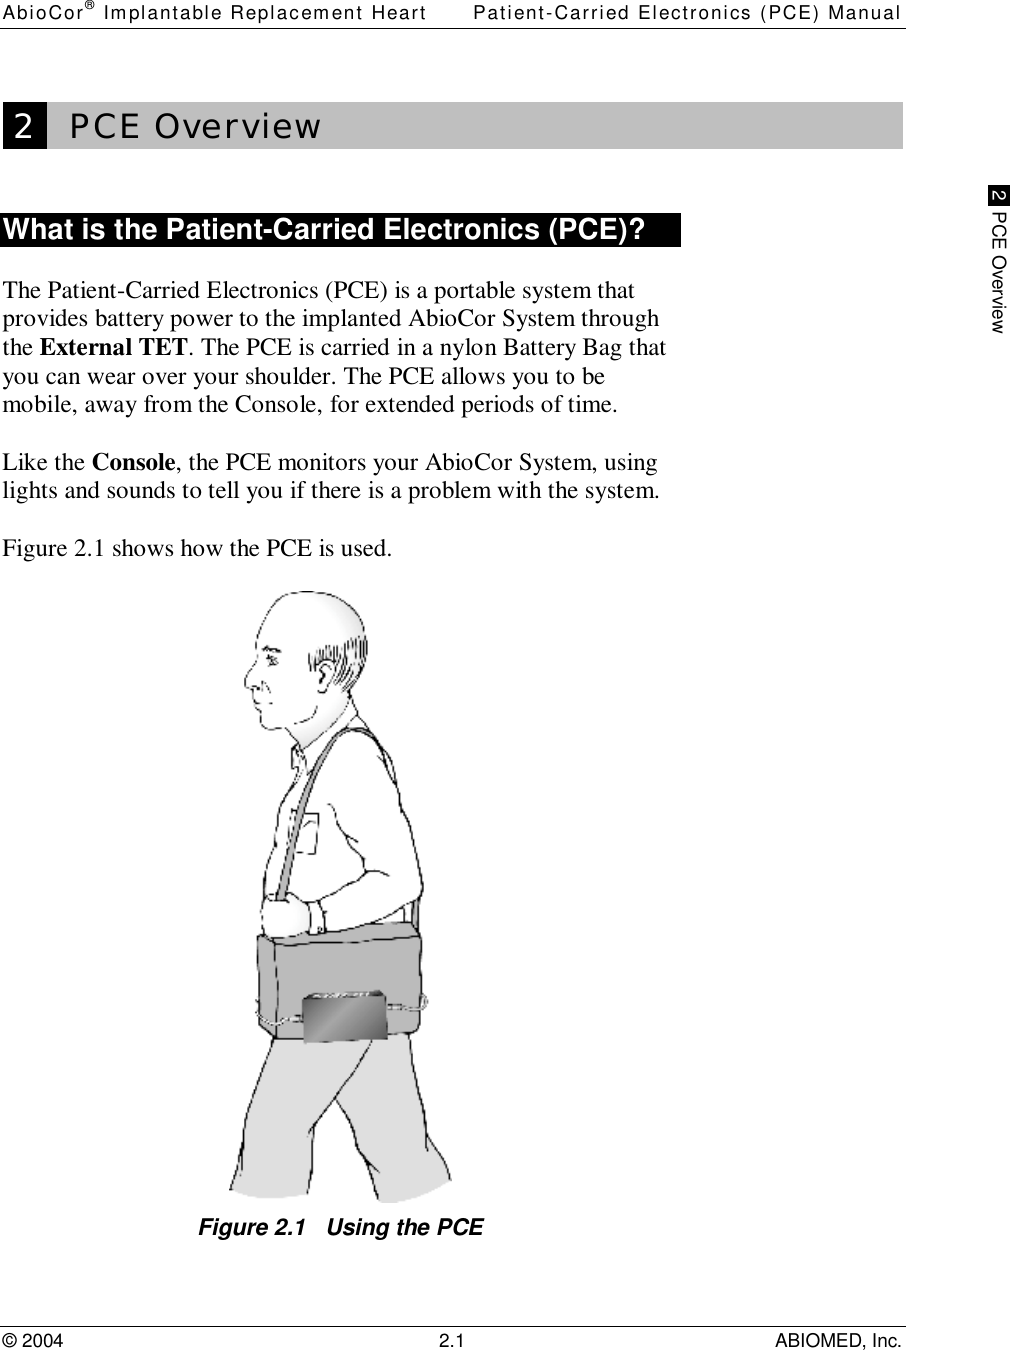 AbioCor® Implantable Replacement Heart Patient-Carried Electronics (PCE) Manual© 2004 2.1 ABIOMED, Inc. 2  PCE Overview 2   PCE OverviewWhat is the Patient-Carried Electronics (PCE)?The Patient-Carried Electronics (PCE) is a portable system thatprovides battery power to the implanted AbioCor System throughthe External TET. The PCE is carried in a nylon Battery Bag thatyou can wear over your shoulder. The PCE allows you to bemobile, away from the Console, for extended periods of time.Like the Console, the PCE monitors your AbioCor System, usinglights and sounds to tell you if there is a problem with the system.Figure 2.1 shows how the PCE is used.Figure 2.1   Using the PCE